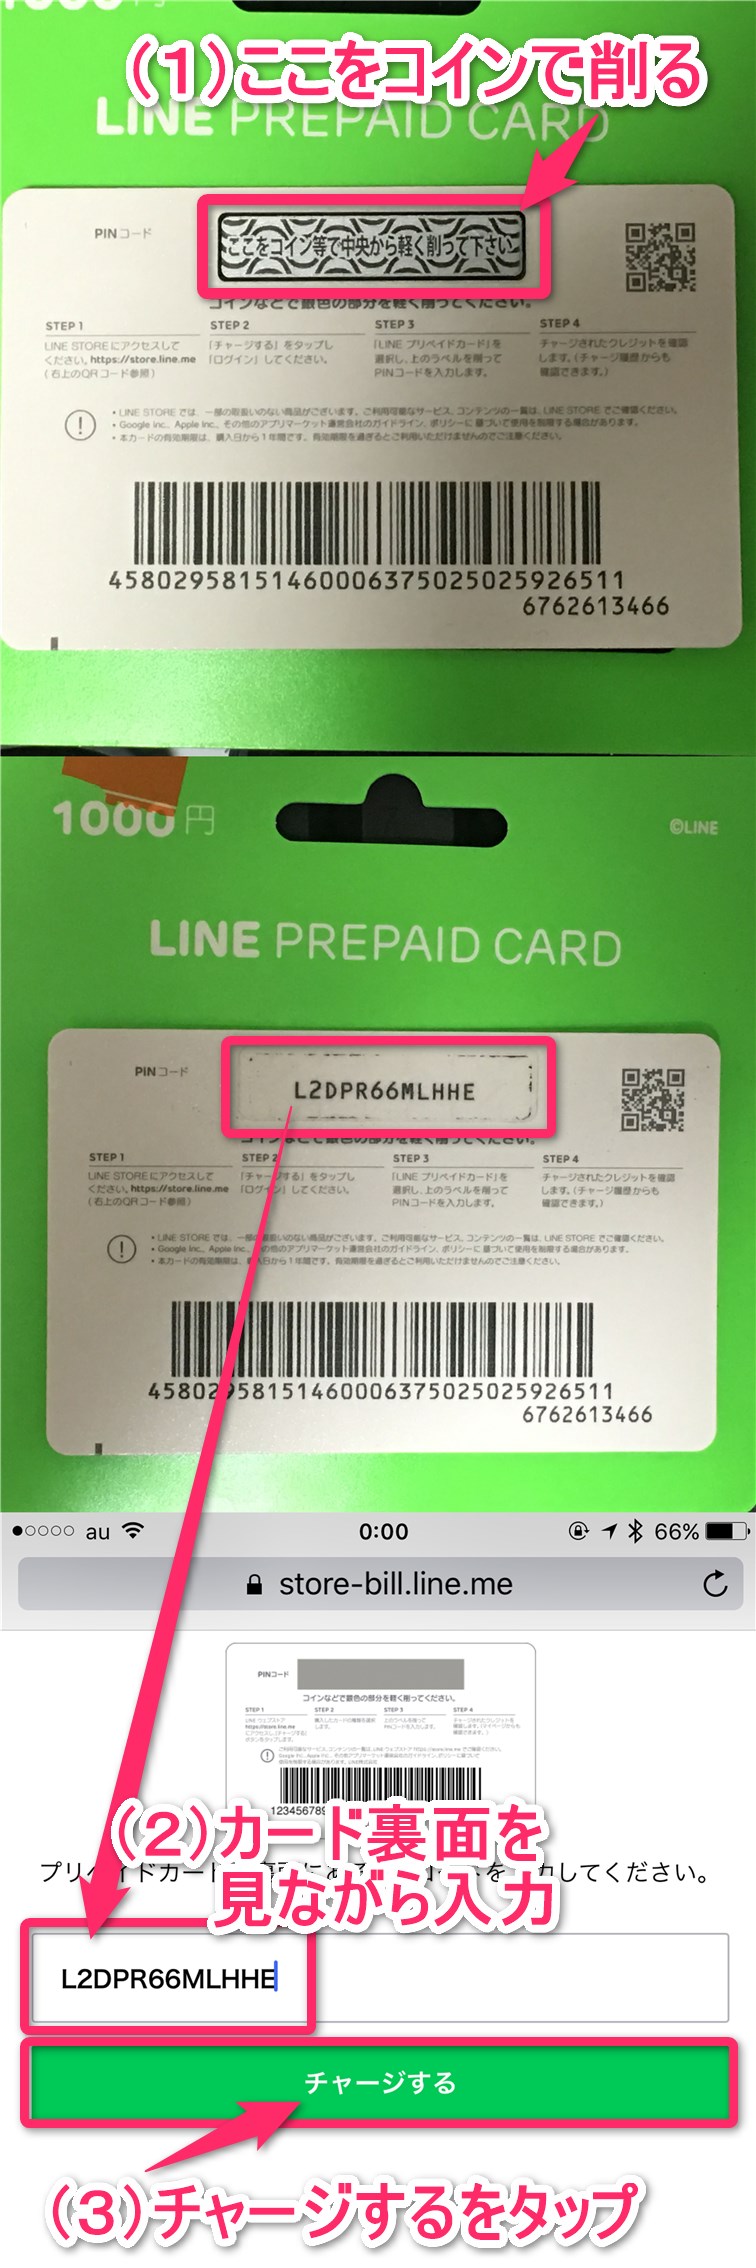 naverline-how-to-use-line-prepaid-card-copy-pin-code